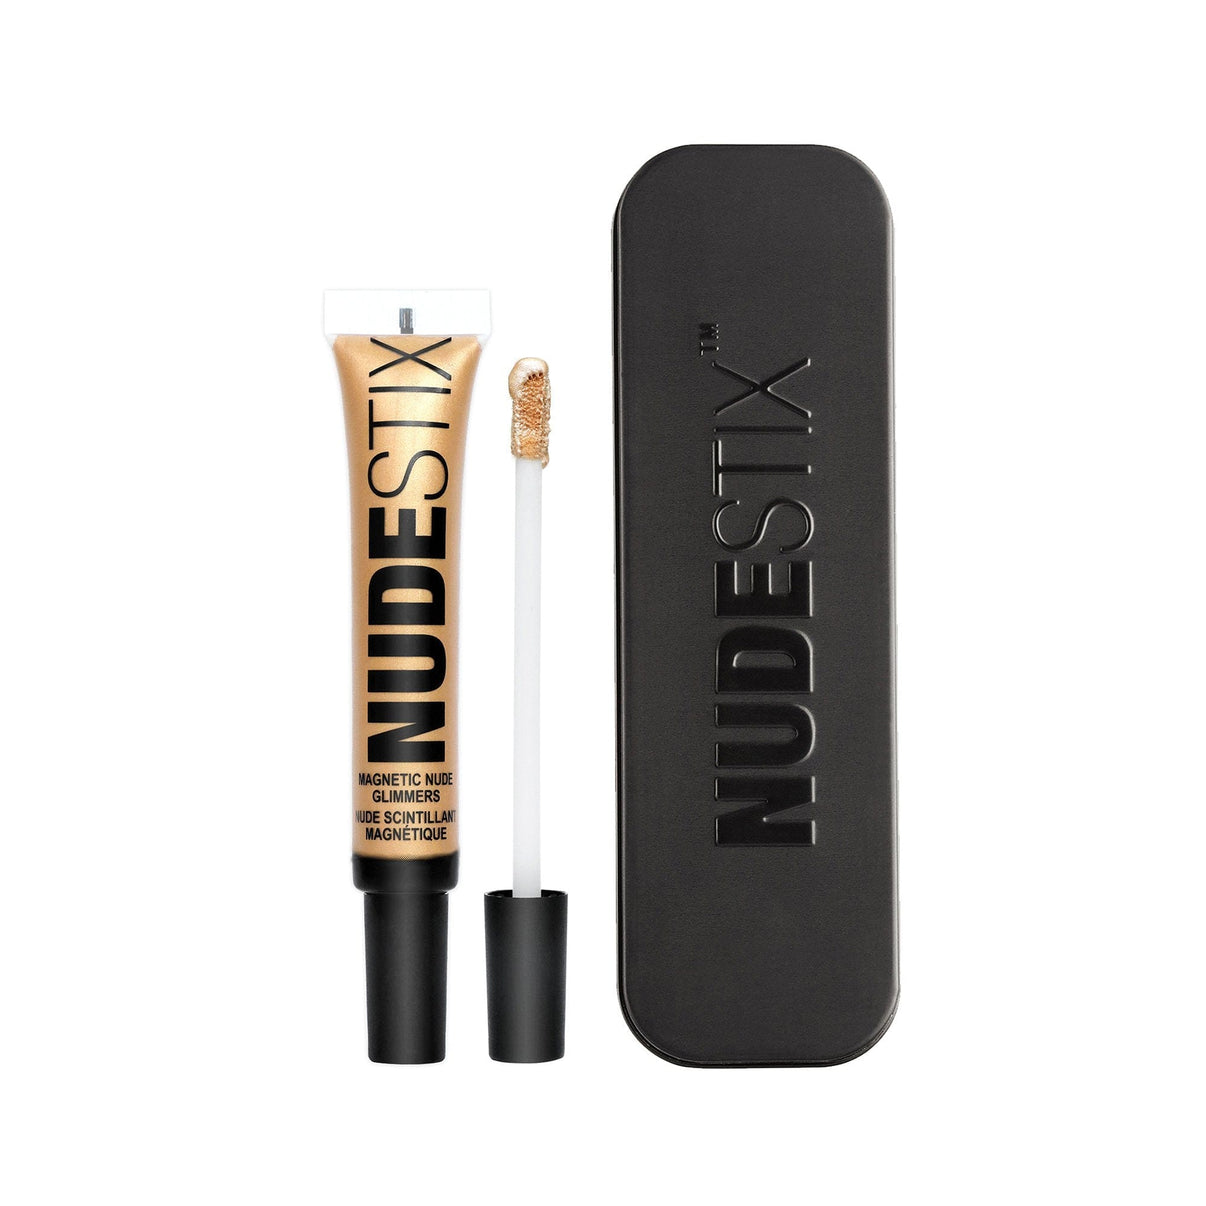 Magnetic Nude Glimmers Liquid Highlighter in shade 24k goddess with nudestix can